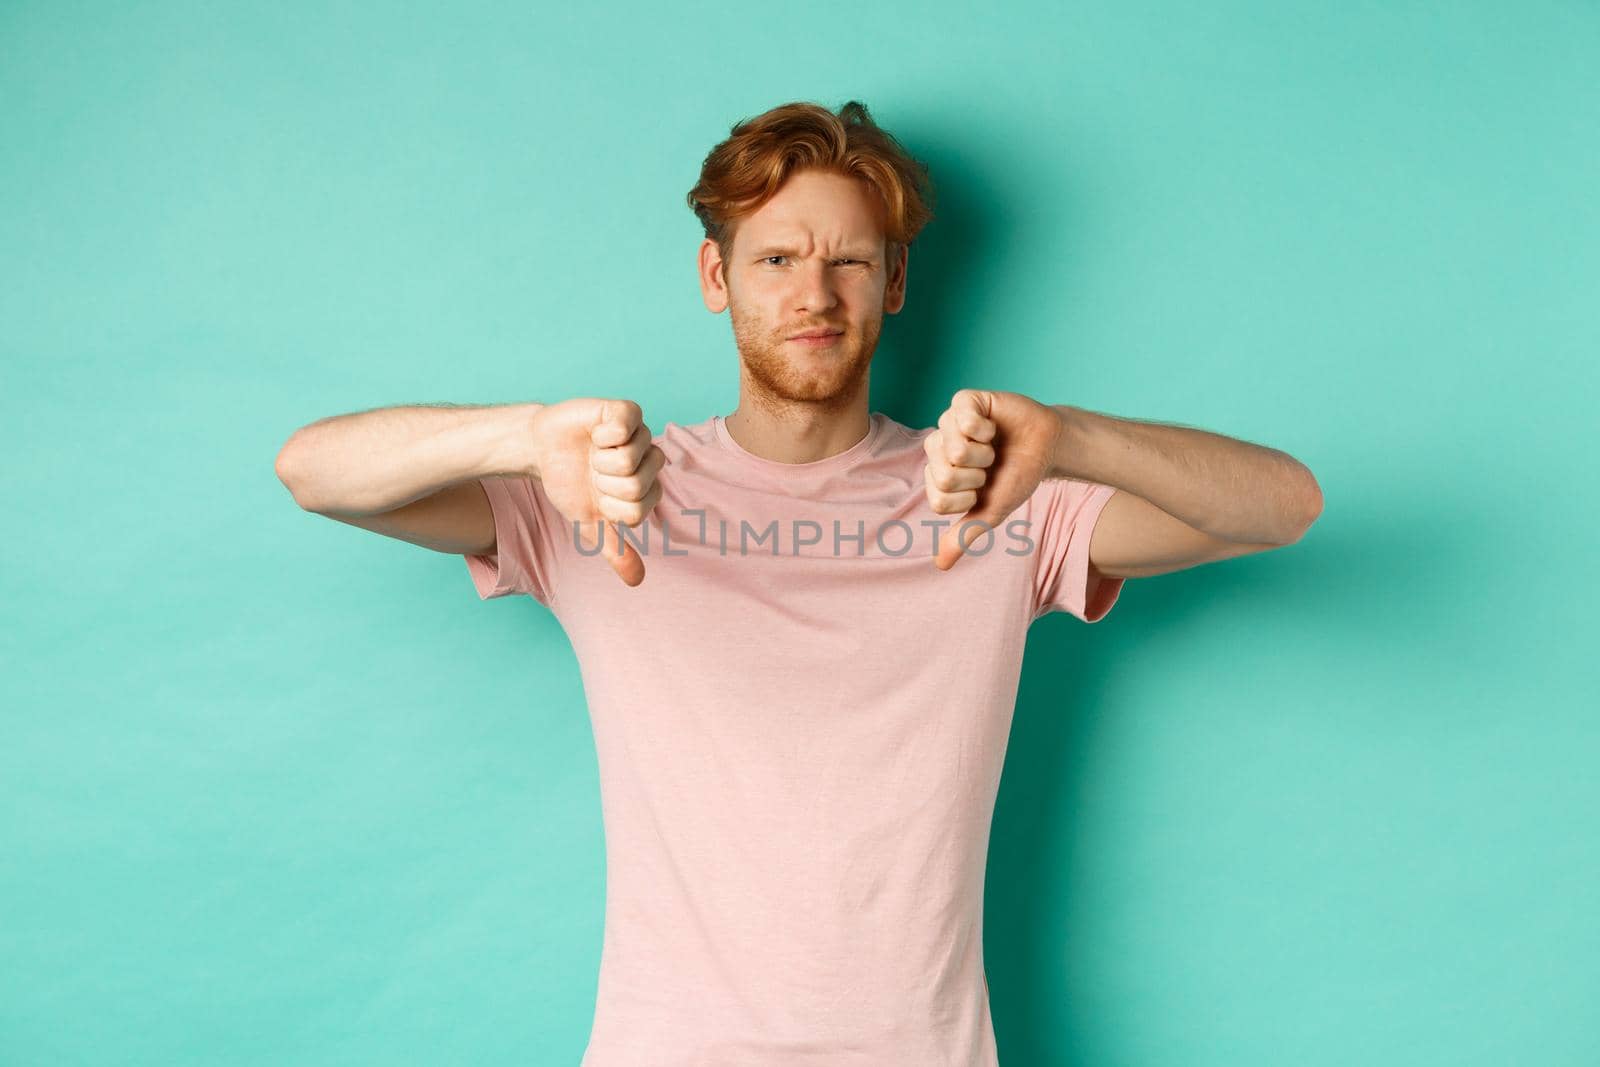 Disappointed guy with red hair showing thumbs-down, frowning and looking skeptical, epxress dislike and disapproval, standing over turquoise background.